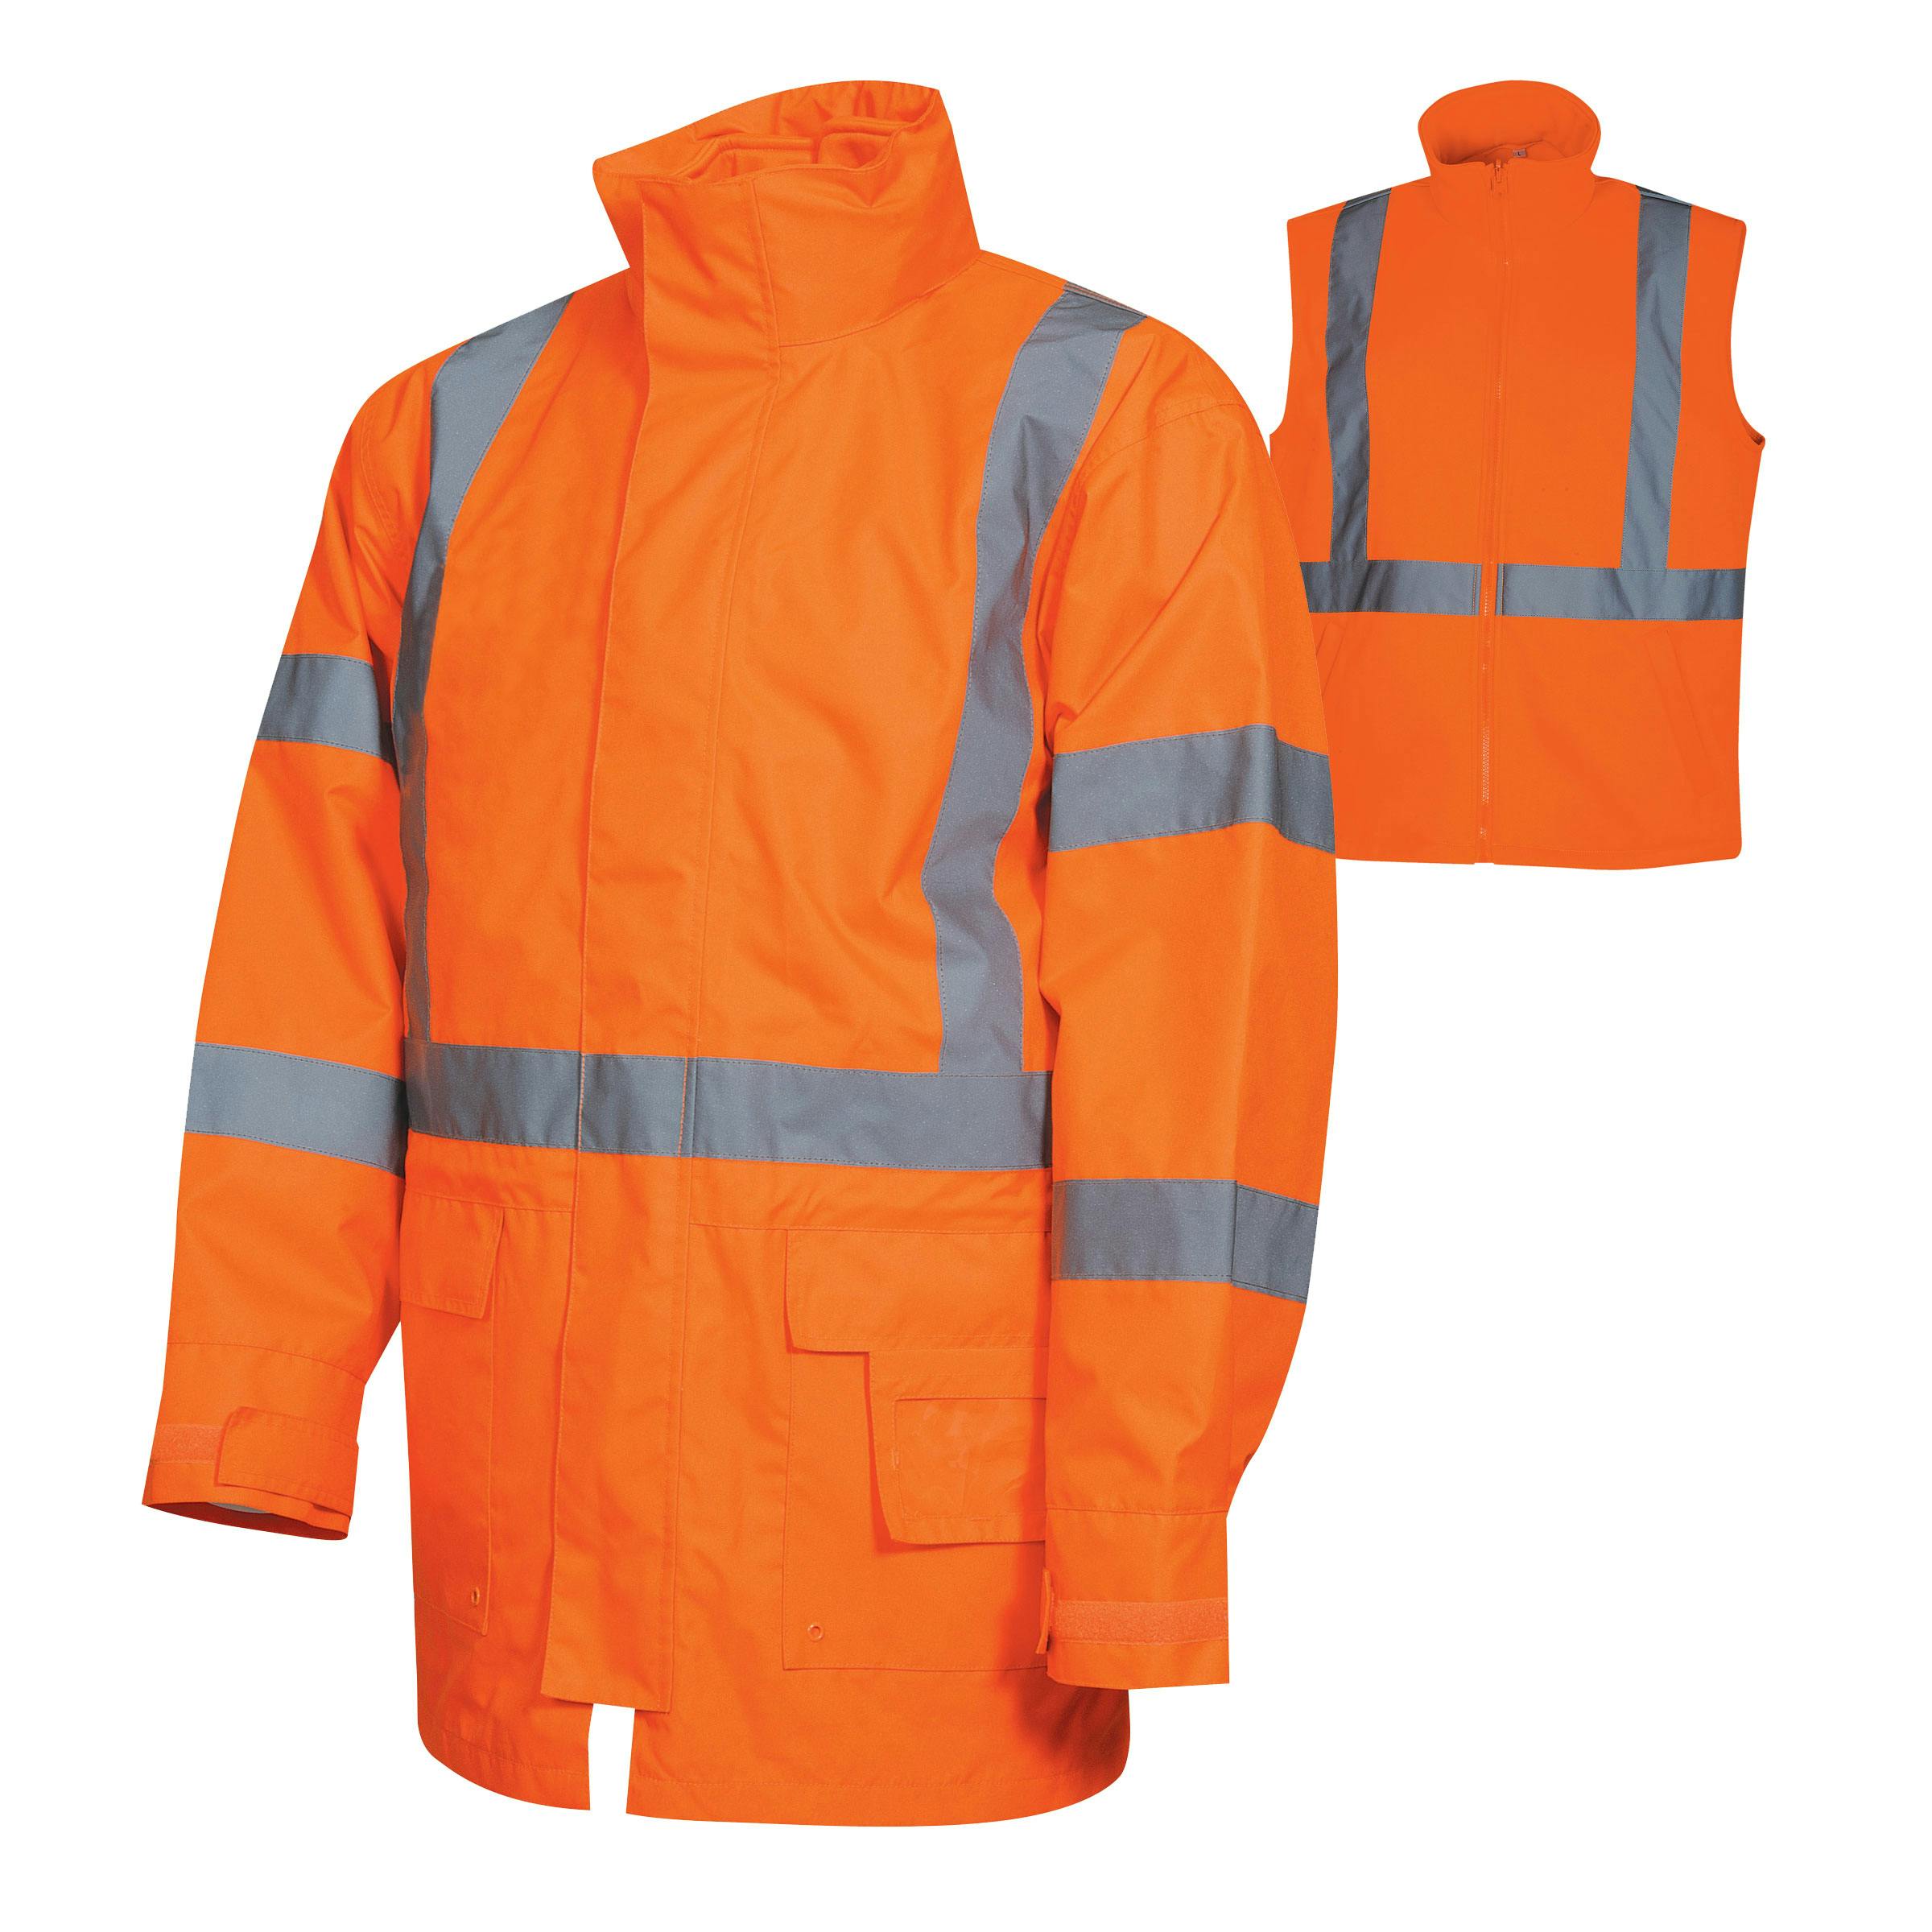 TRu Workwear Jacket 3 In 1 Poly Oxford Outer, Poly Fleece Vest  And Reflective Tape To T5 Pattern